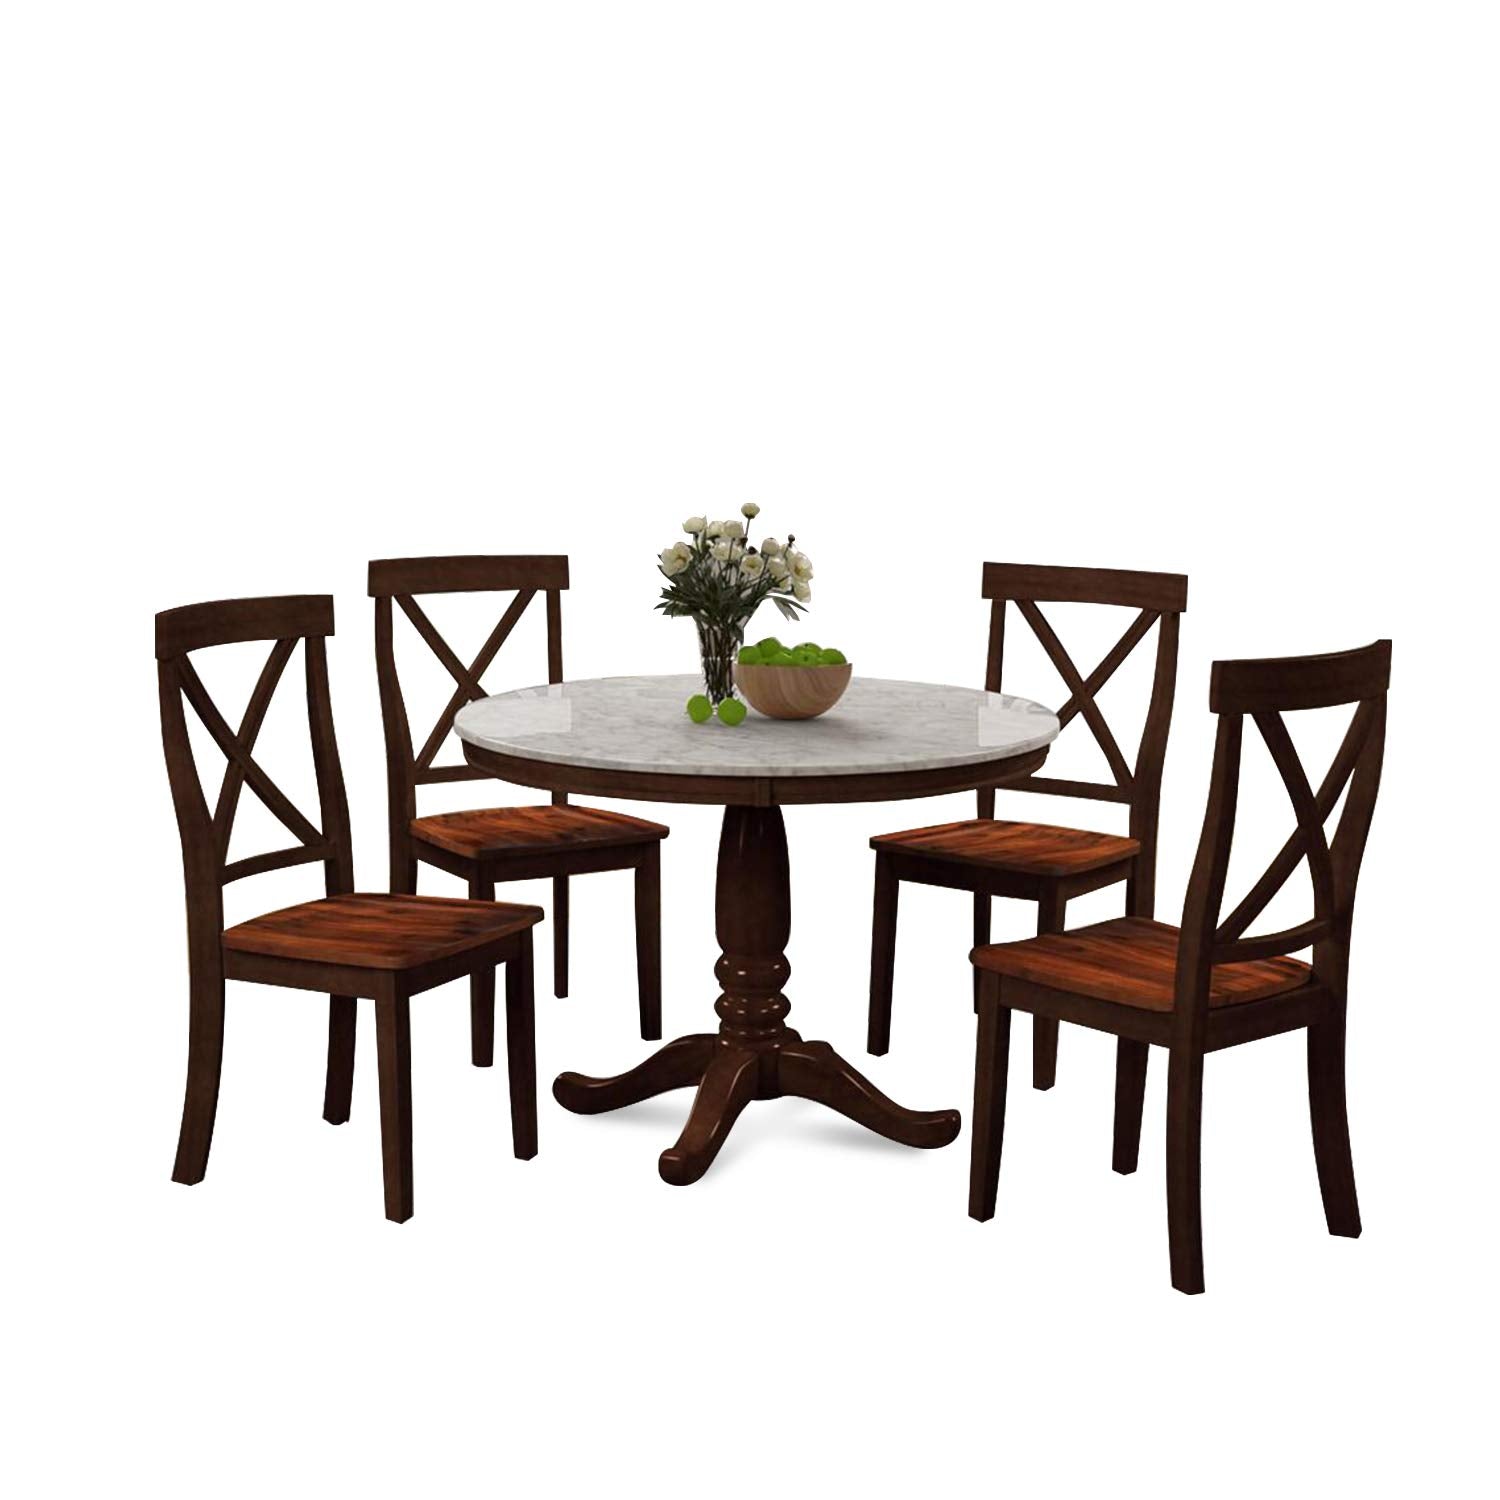 5 Pieces Dining Table and Chairs Set for 4 Persons, Kitchen Room Solid Wood Table with 4 Chairs-Boyel Living